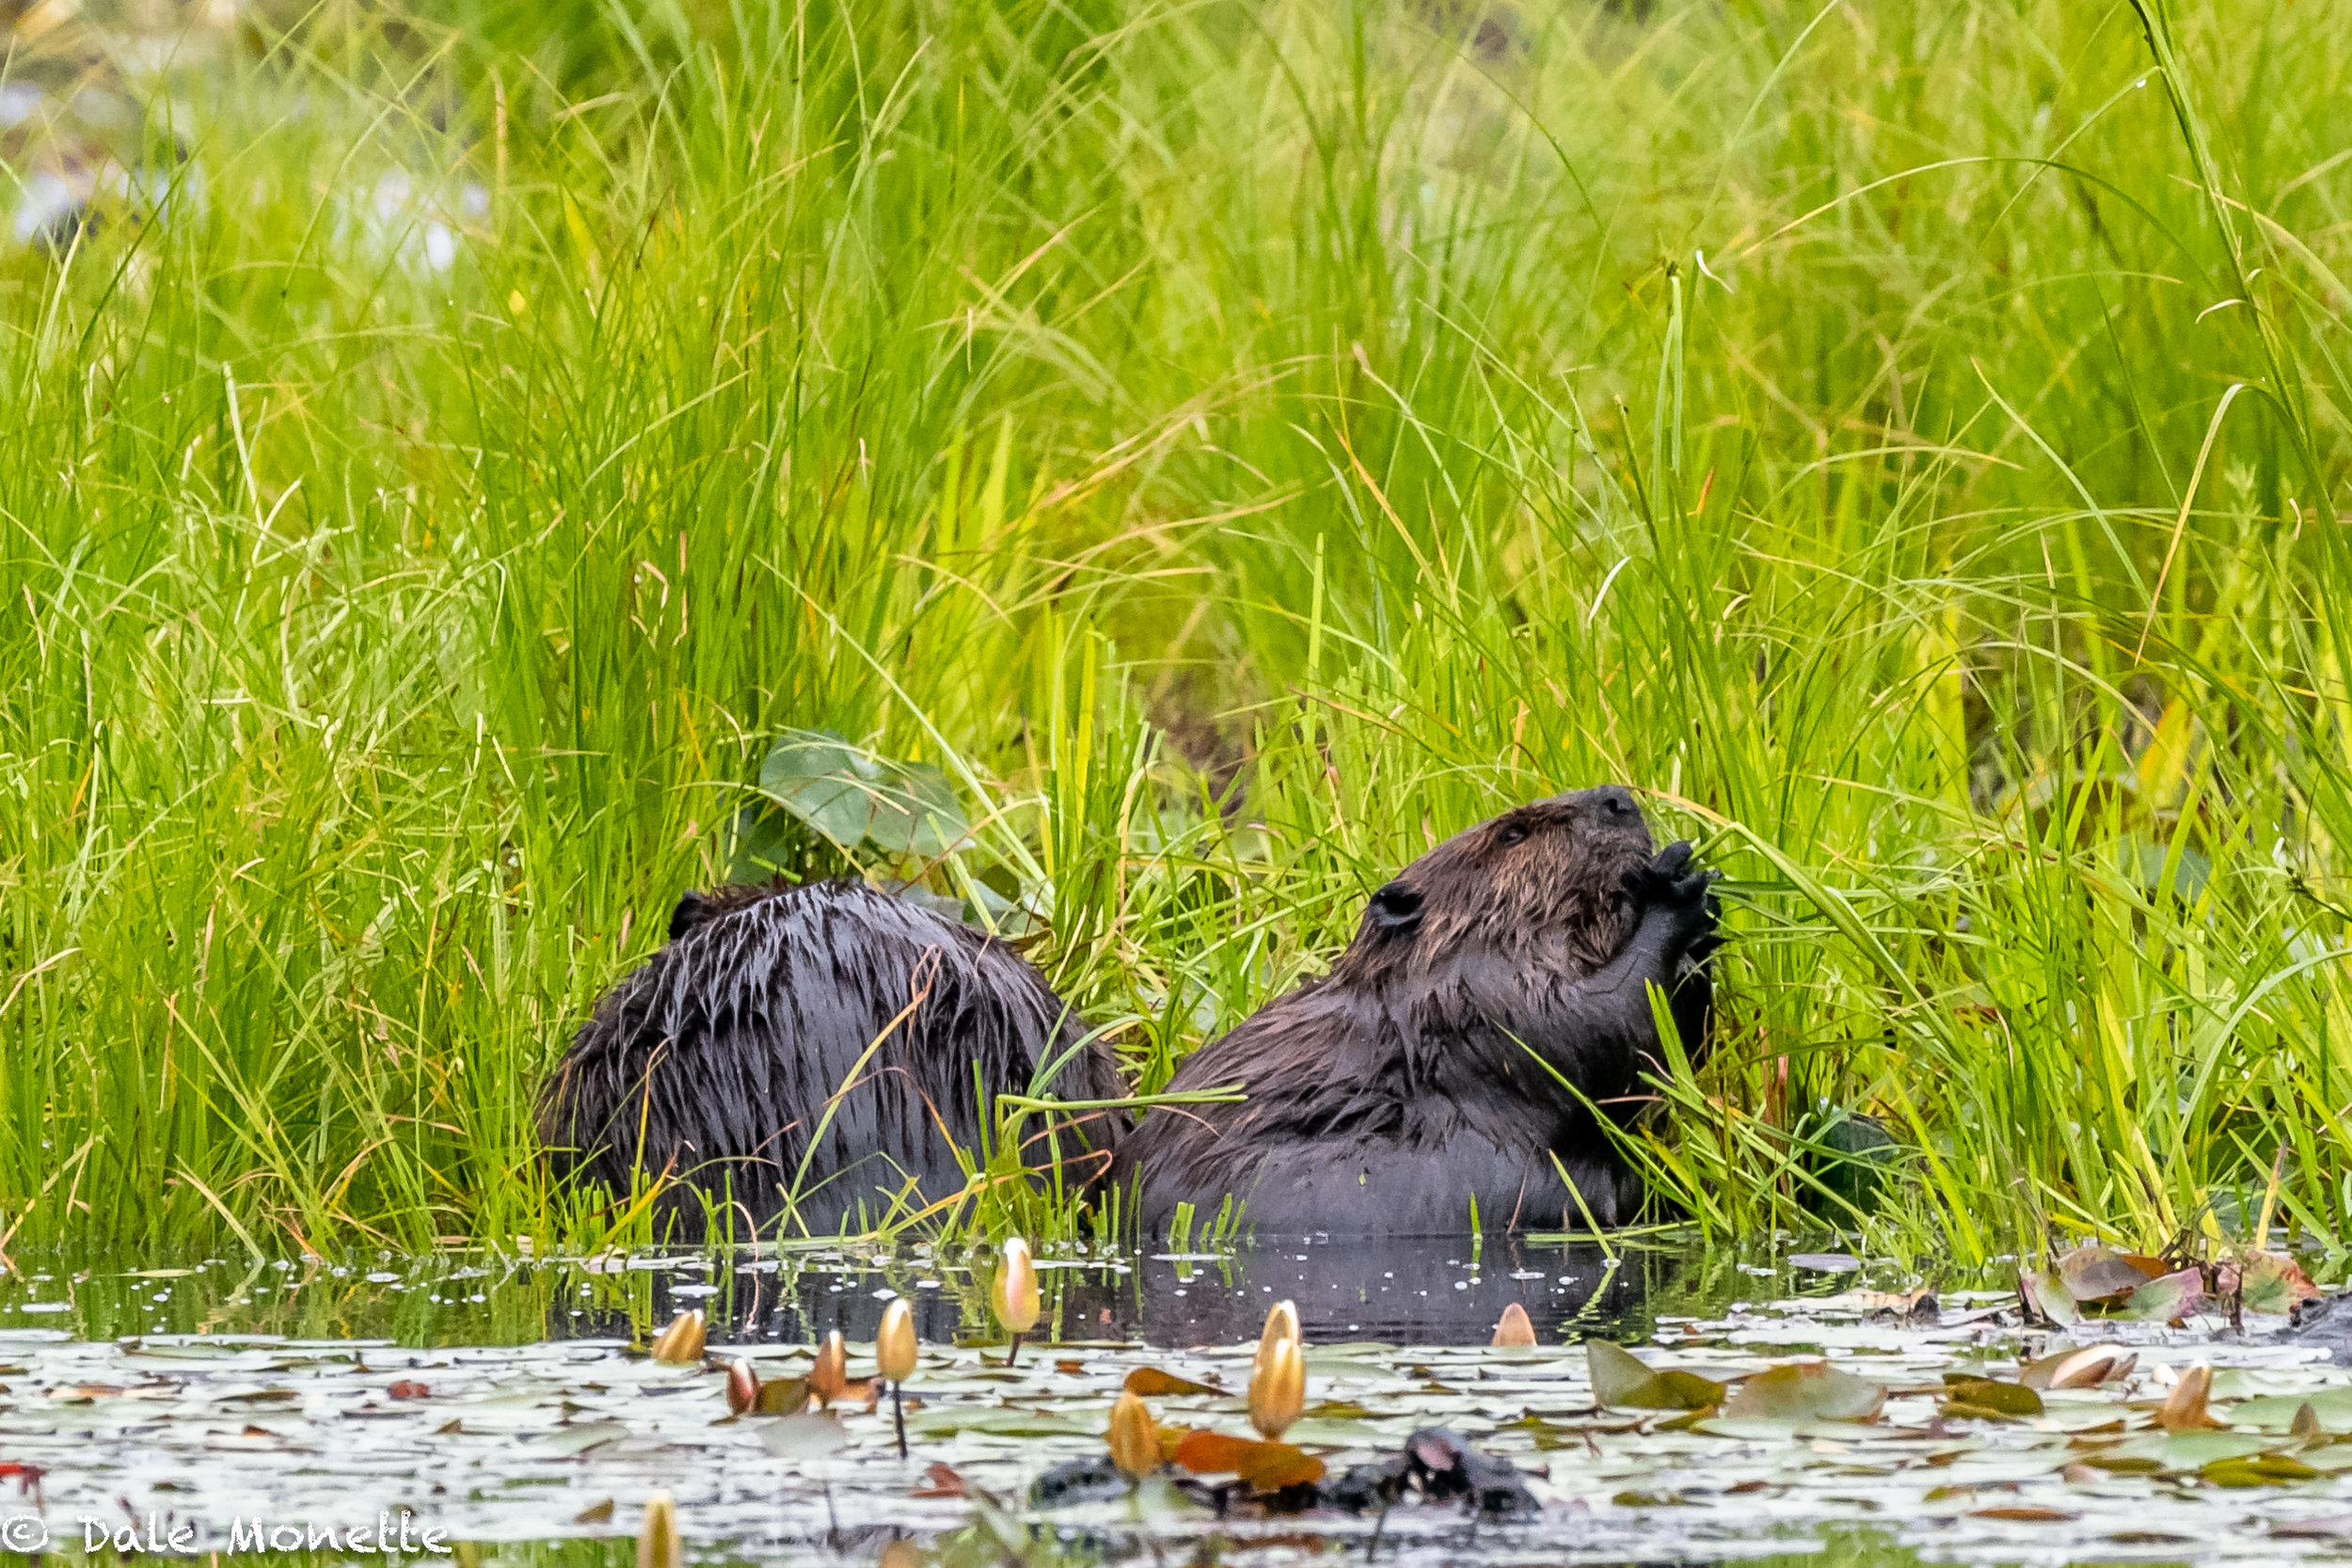   Have breakfast with your brother !   This pair of beavers appeared in front of me about 30 yards on this grass hummock.  They spent 20 minutes eating fresh grass. It must be a change of pace from munching bark!   